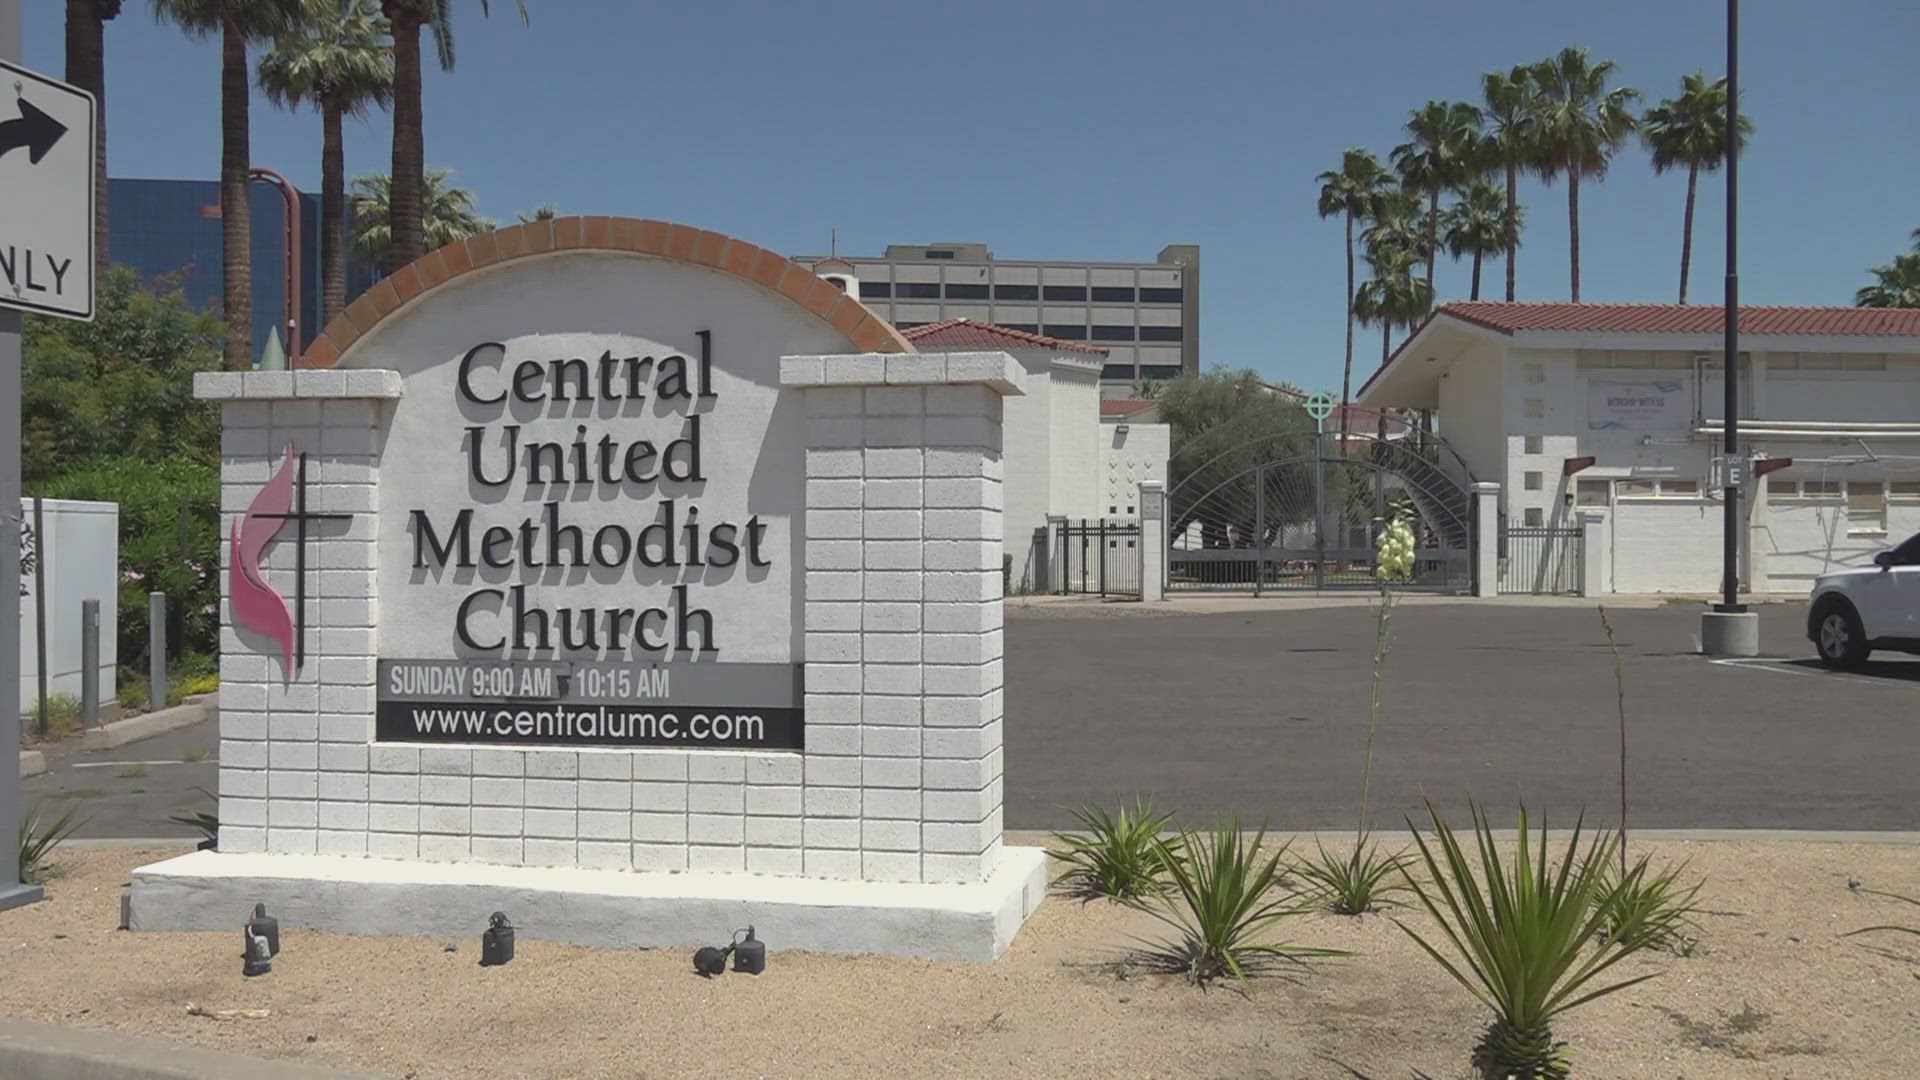 It was the first Protestant church in Phoenix and grew from having a traveling pastor who stopped by every few weeks to a central community of parishioners.